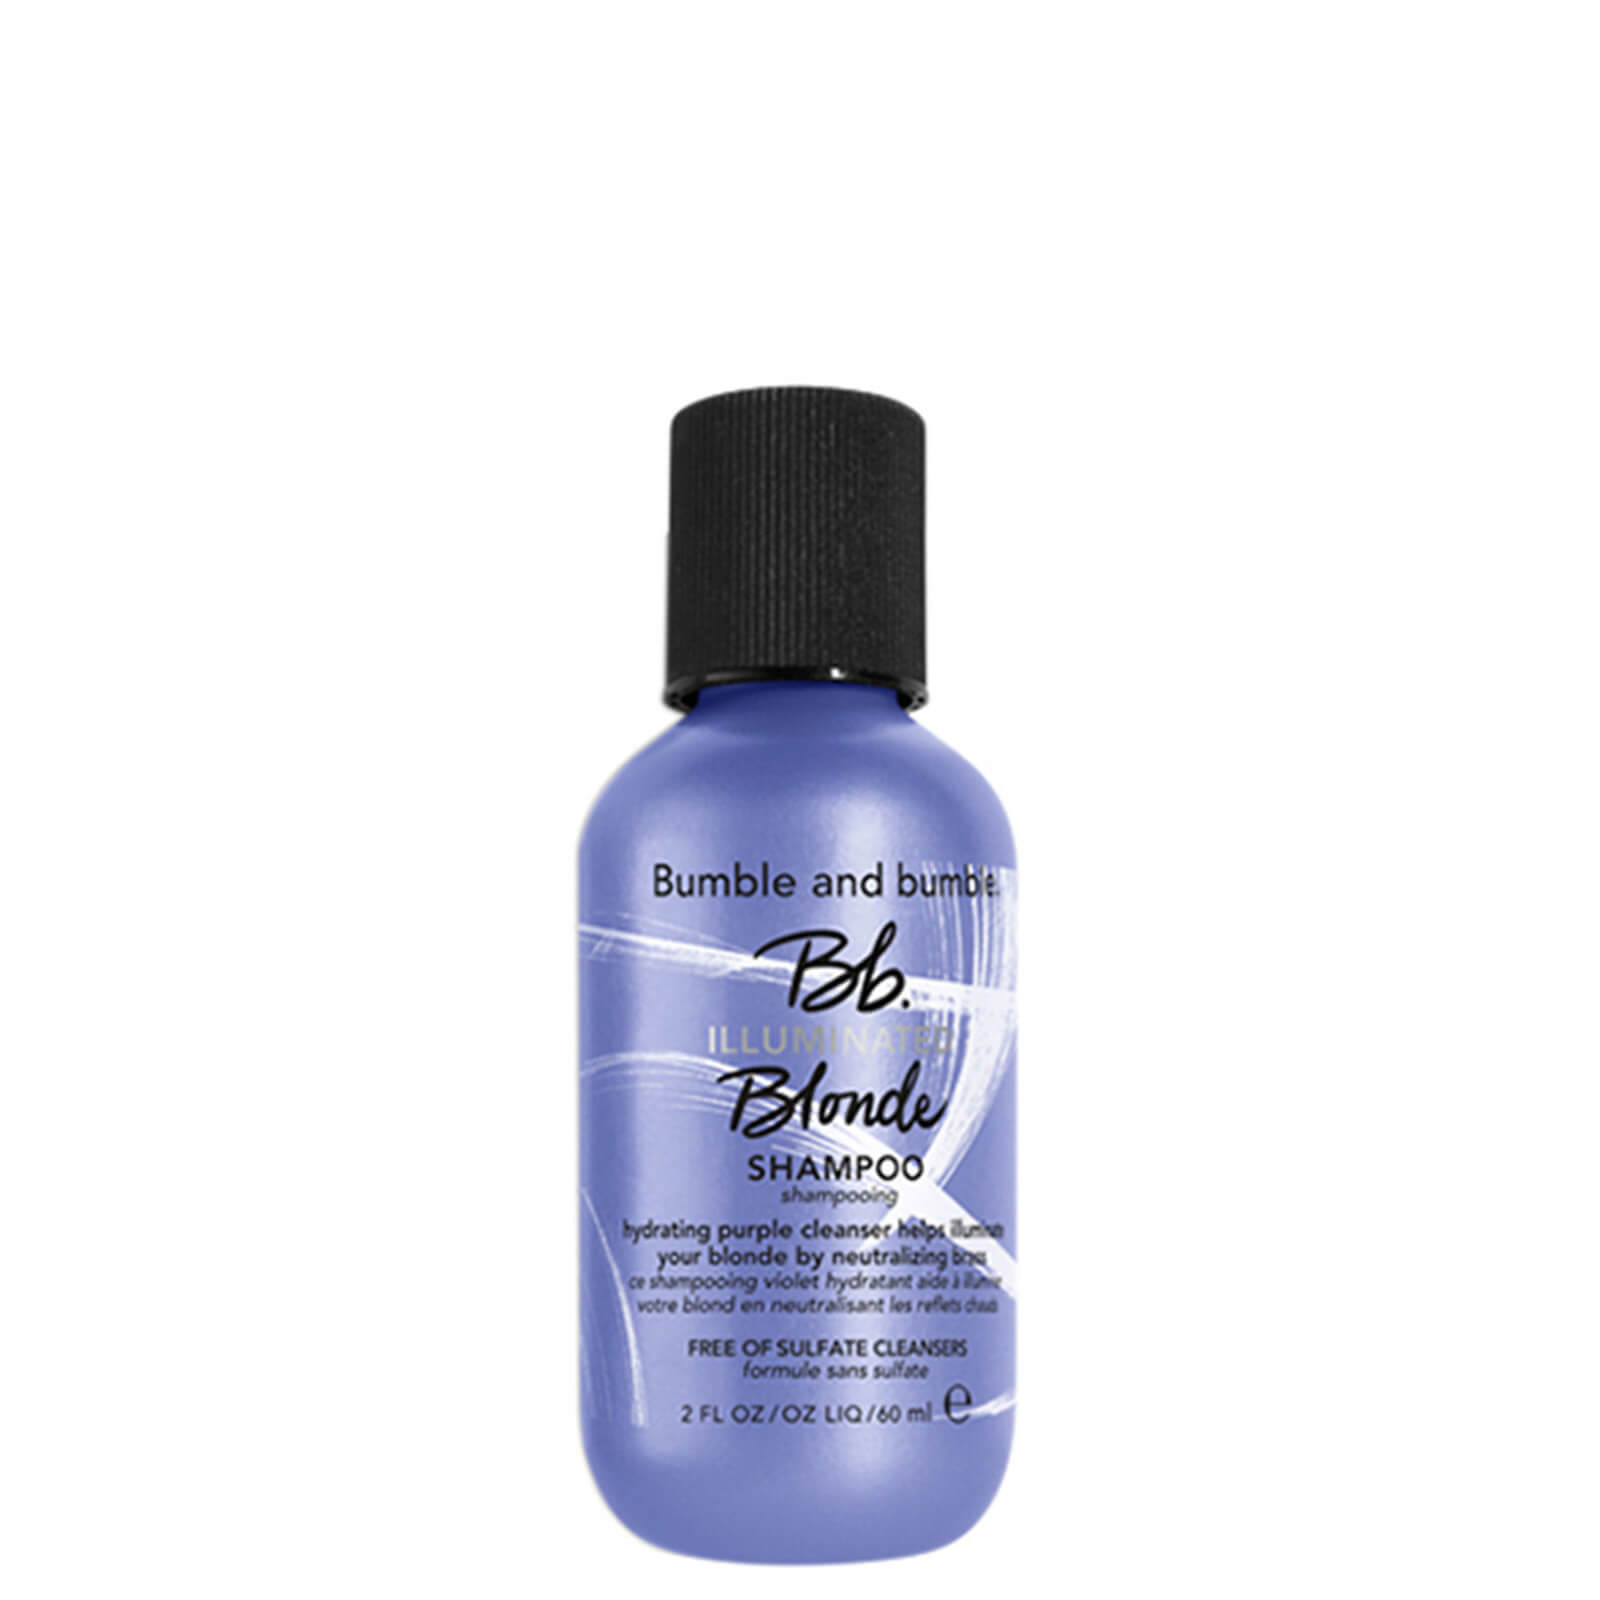 Image of Bumble and bumble Blonde Shampoo (Various Sizes) - 60ml